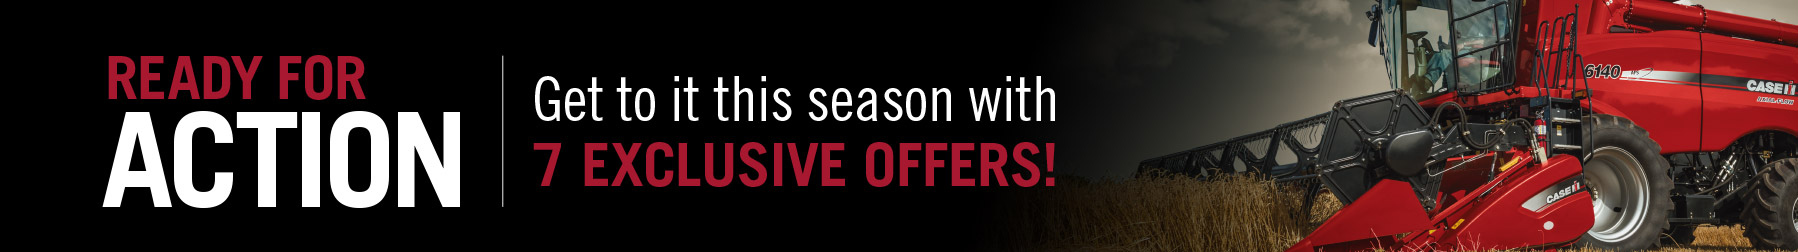 Ready for Action | Get to it this season with 7 exclusive offers!